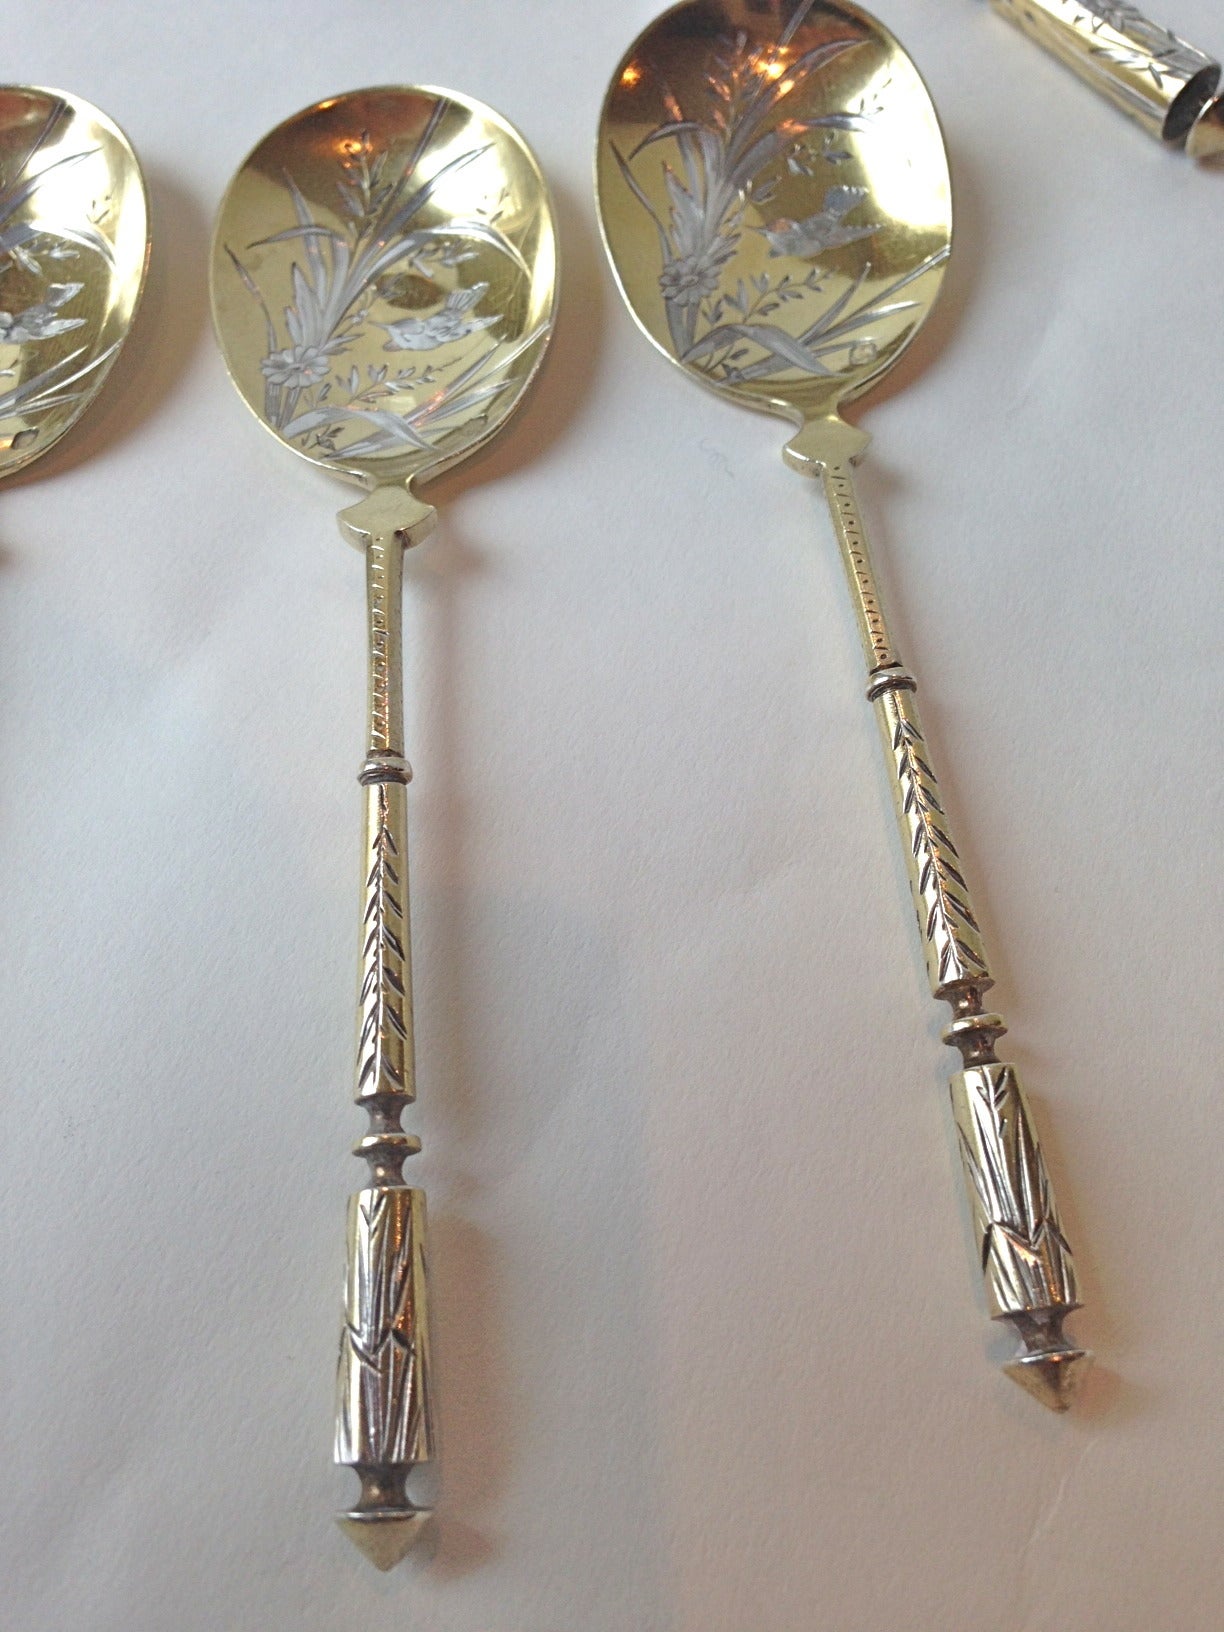 Beautifully executed cast and chased to perfection is this set, the circle shape ice cream cutter, and the little sauce spoon, even a nut spoon. Charming with the bird chased on each piece. The condition is exceptional. Hallmarked for French